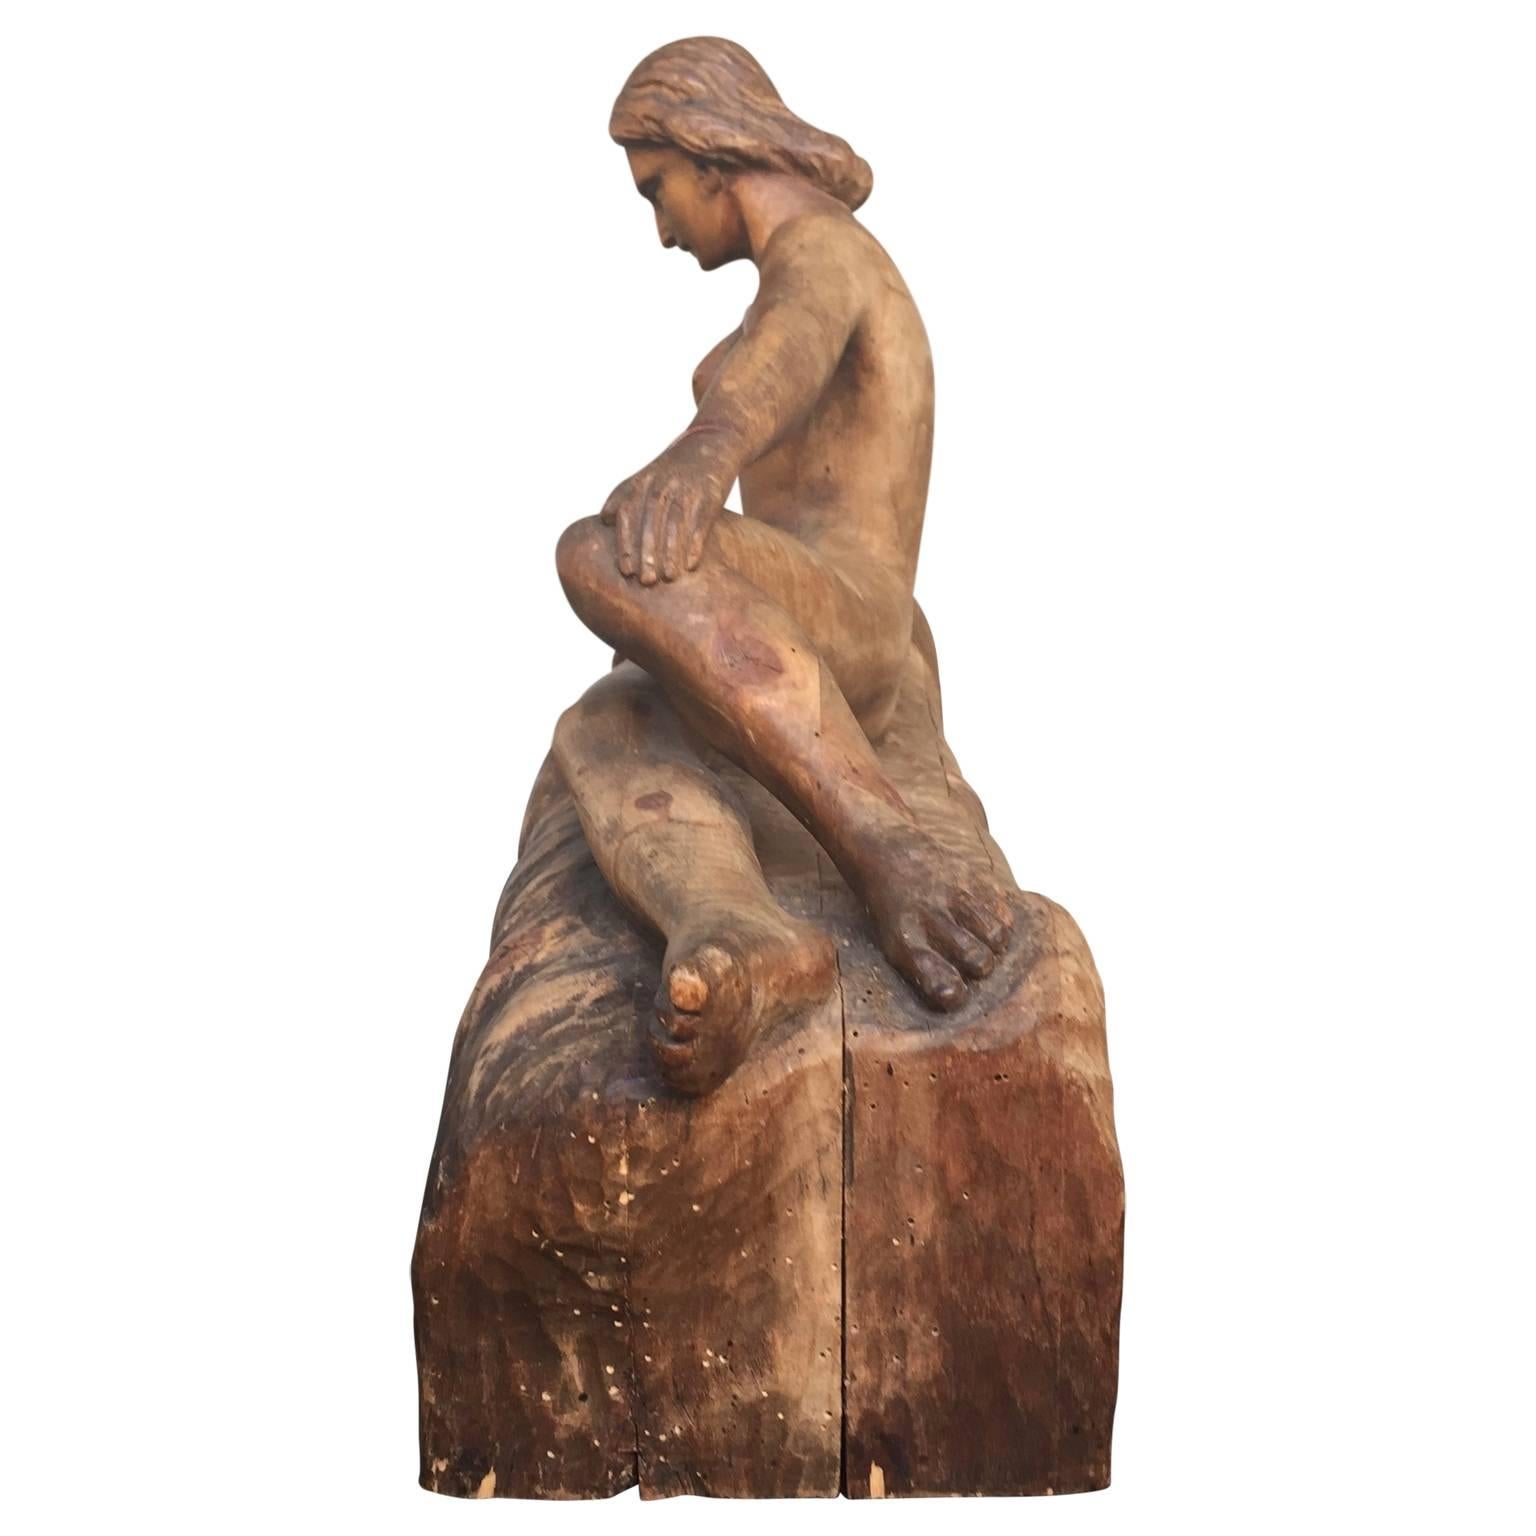 20th Century German Sculpture of Mother and Child, Signed Muller Rod 1943